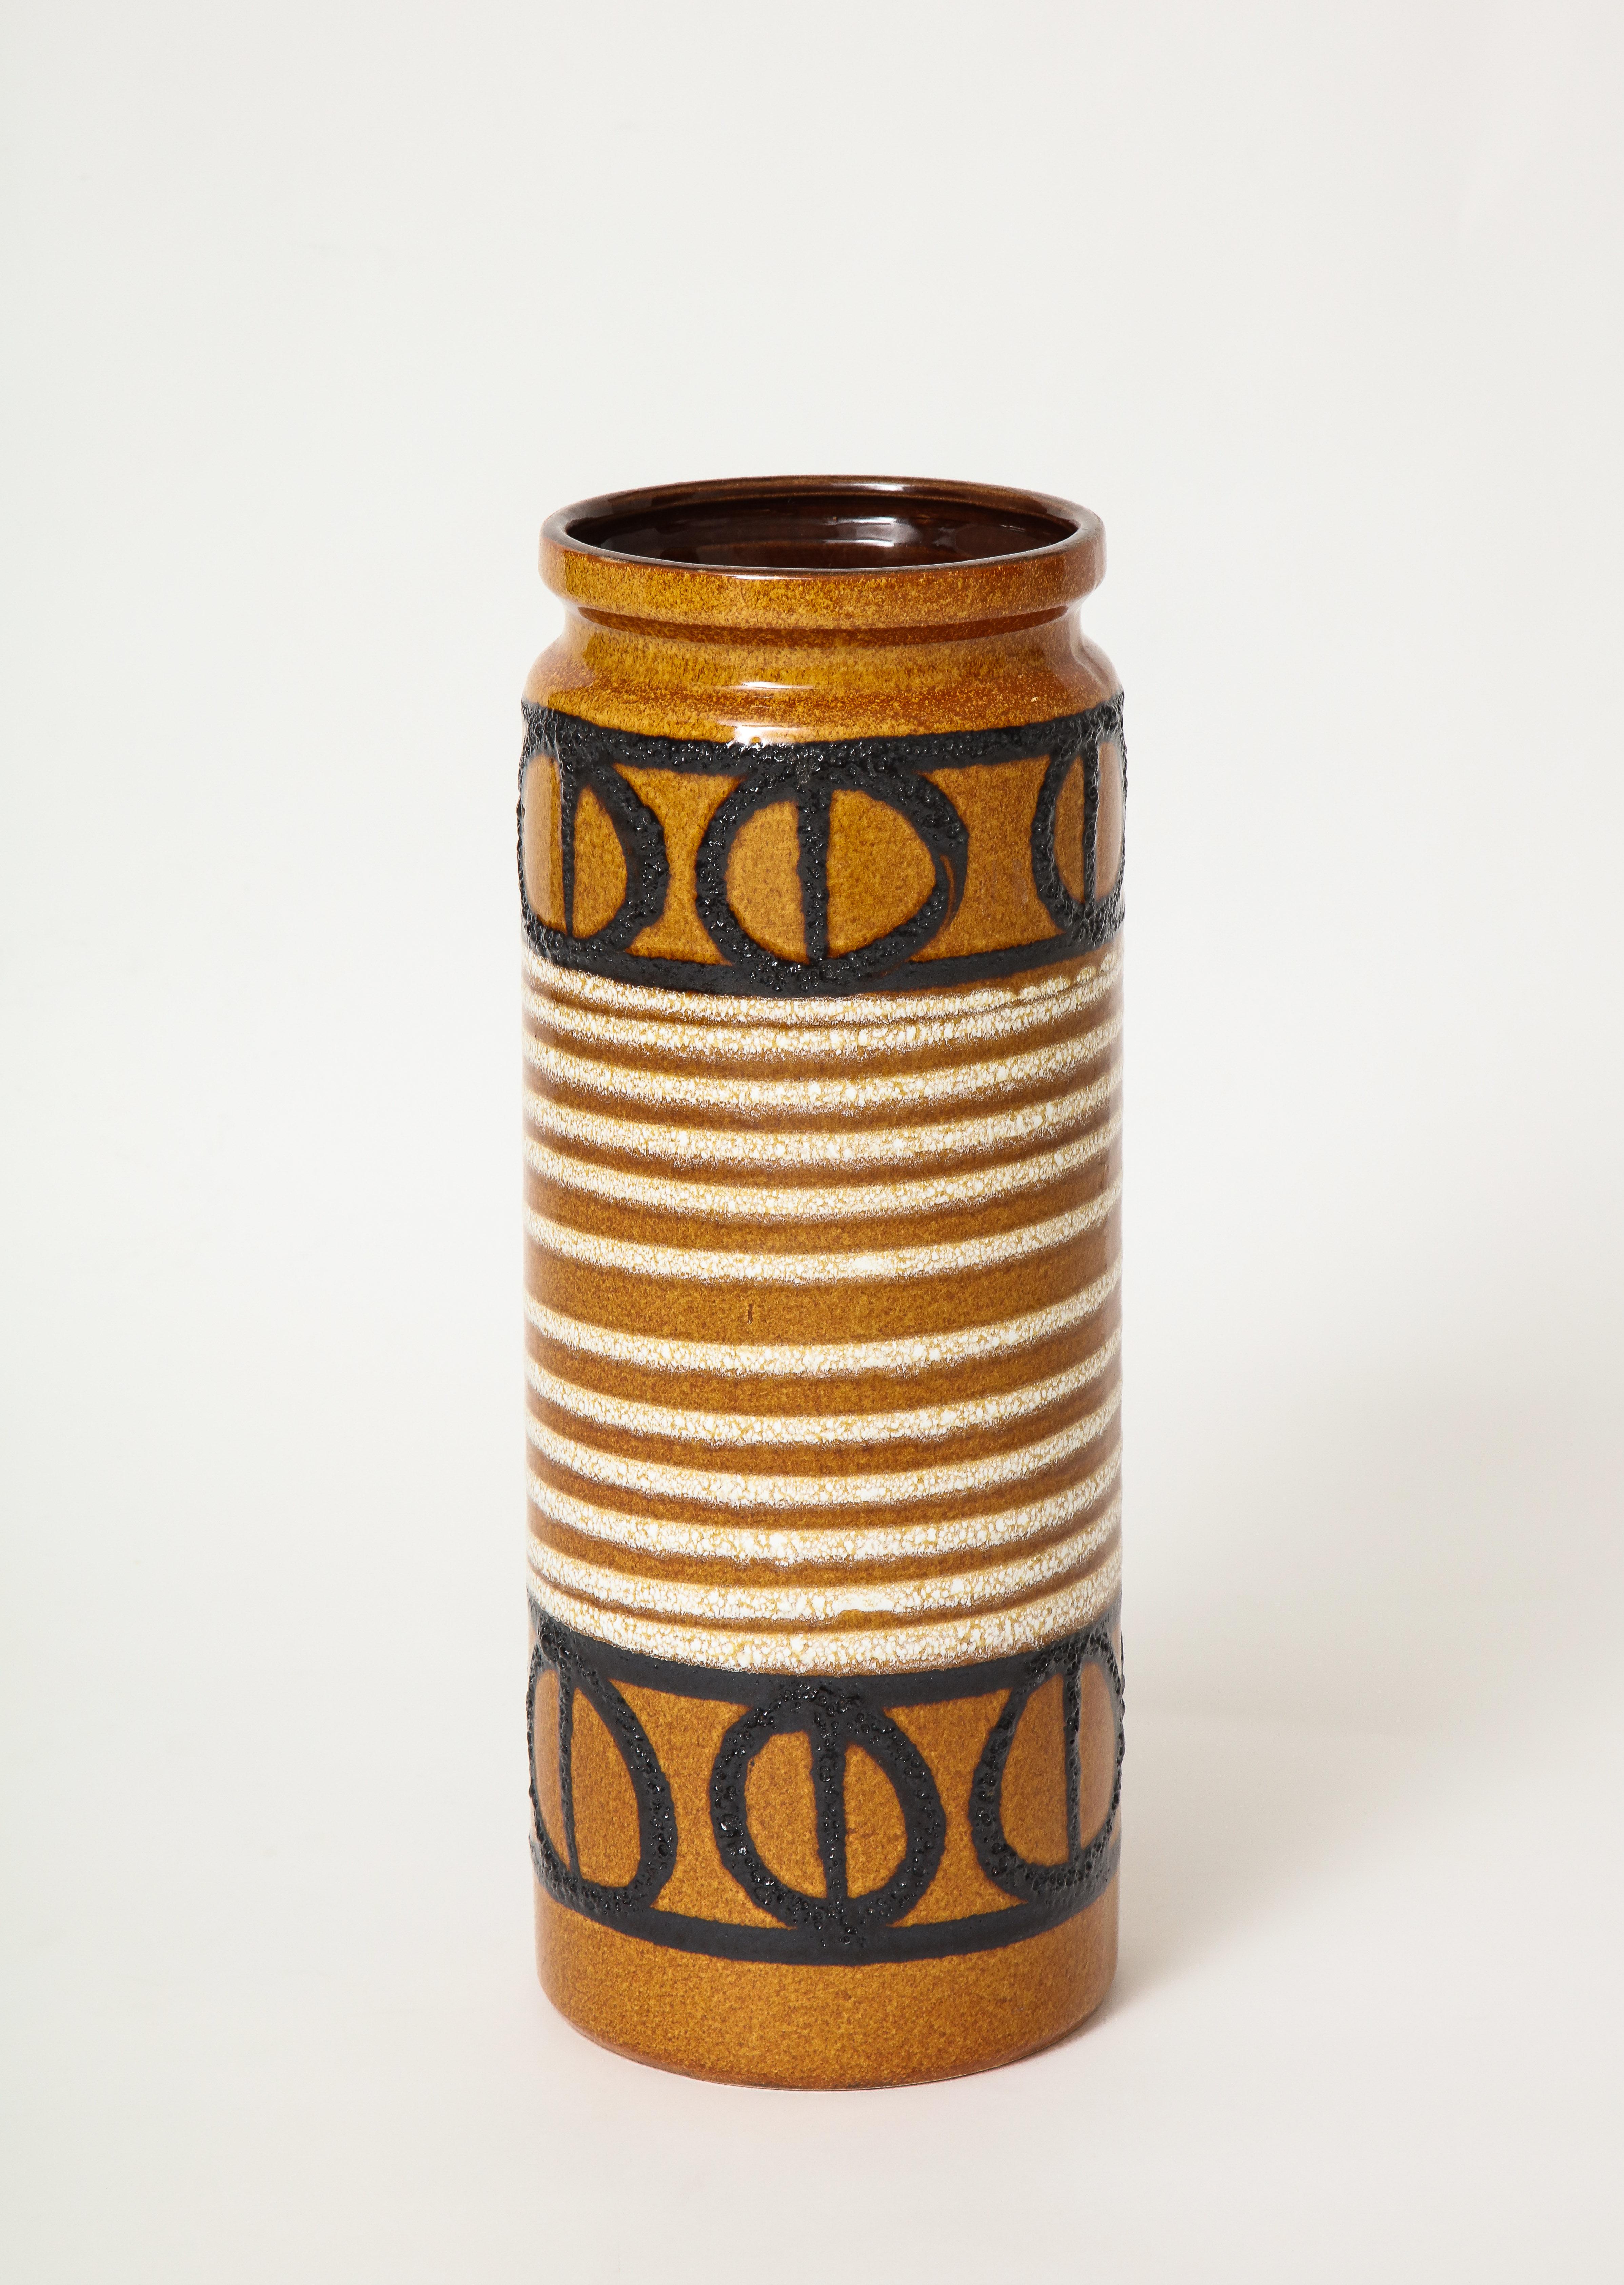 A large art pottery vase by Scheurich.
West Germany, circa 1970s
Size: 17